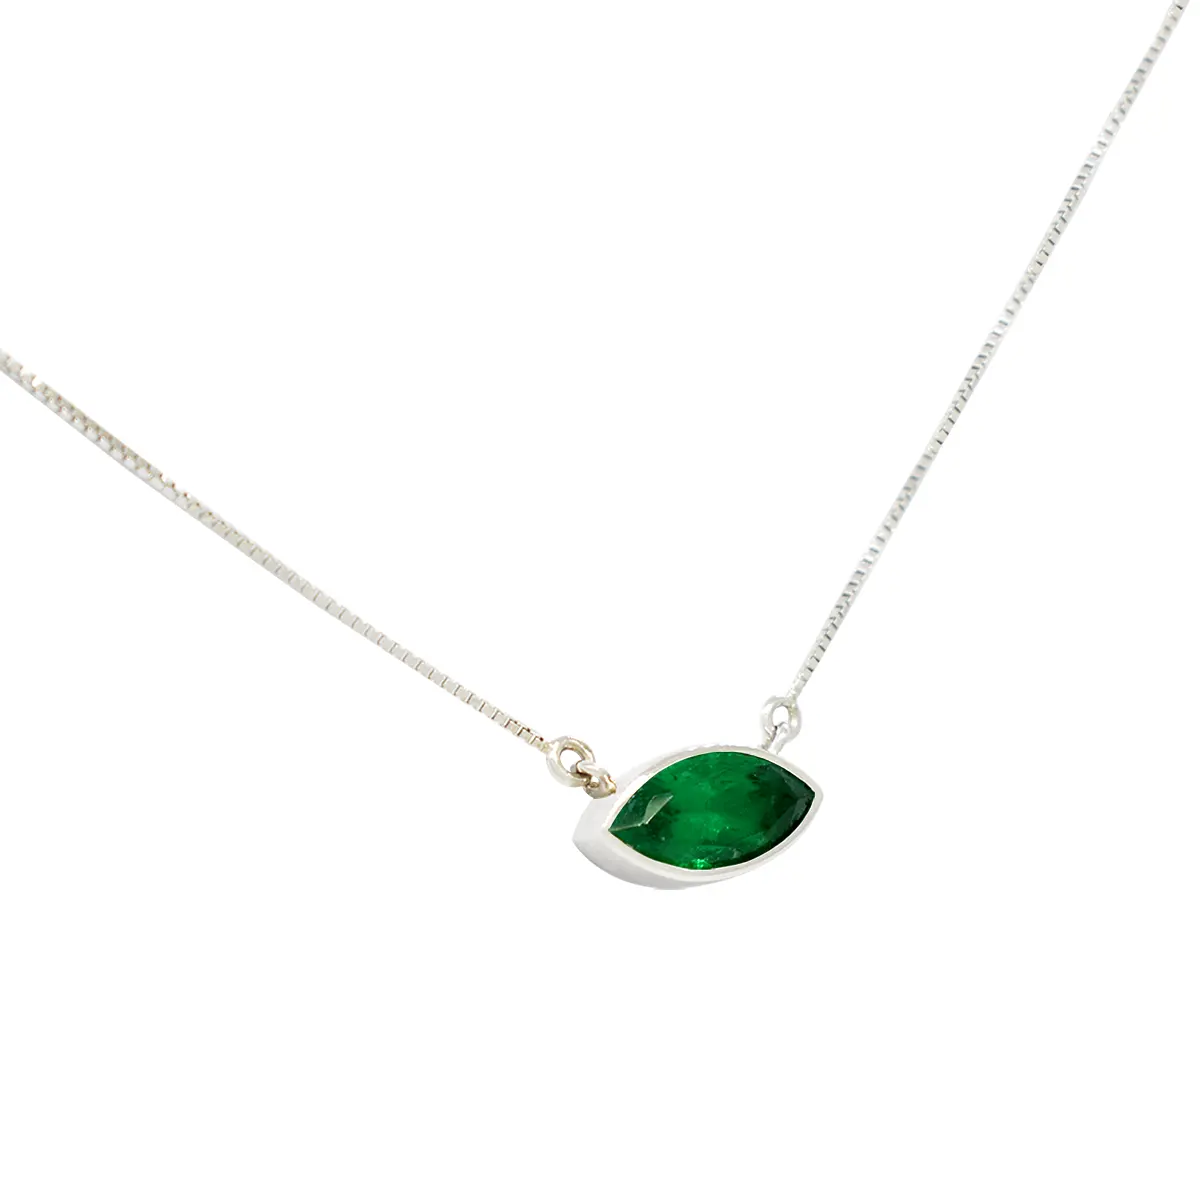 Green eye-shaped emerald necklace in white gold with real high-quality Colombian emerald set east-west in a solitaire necklace design